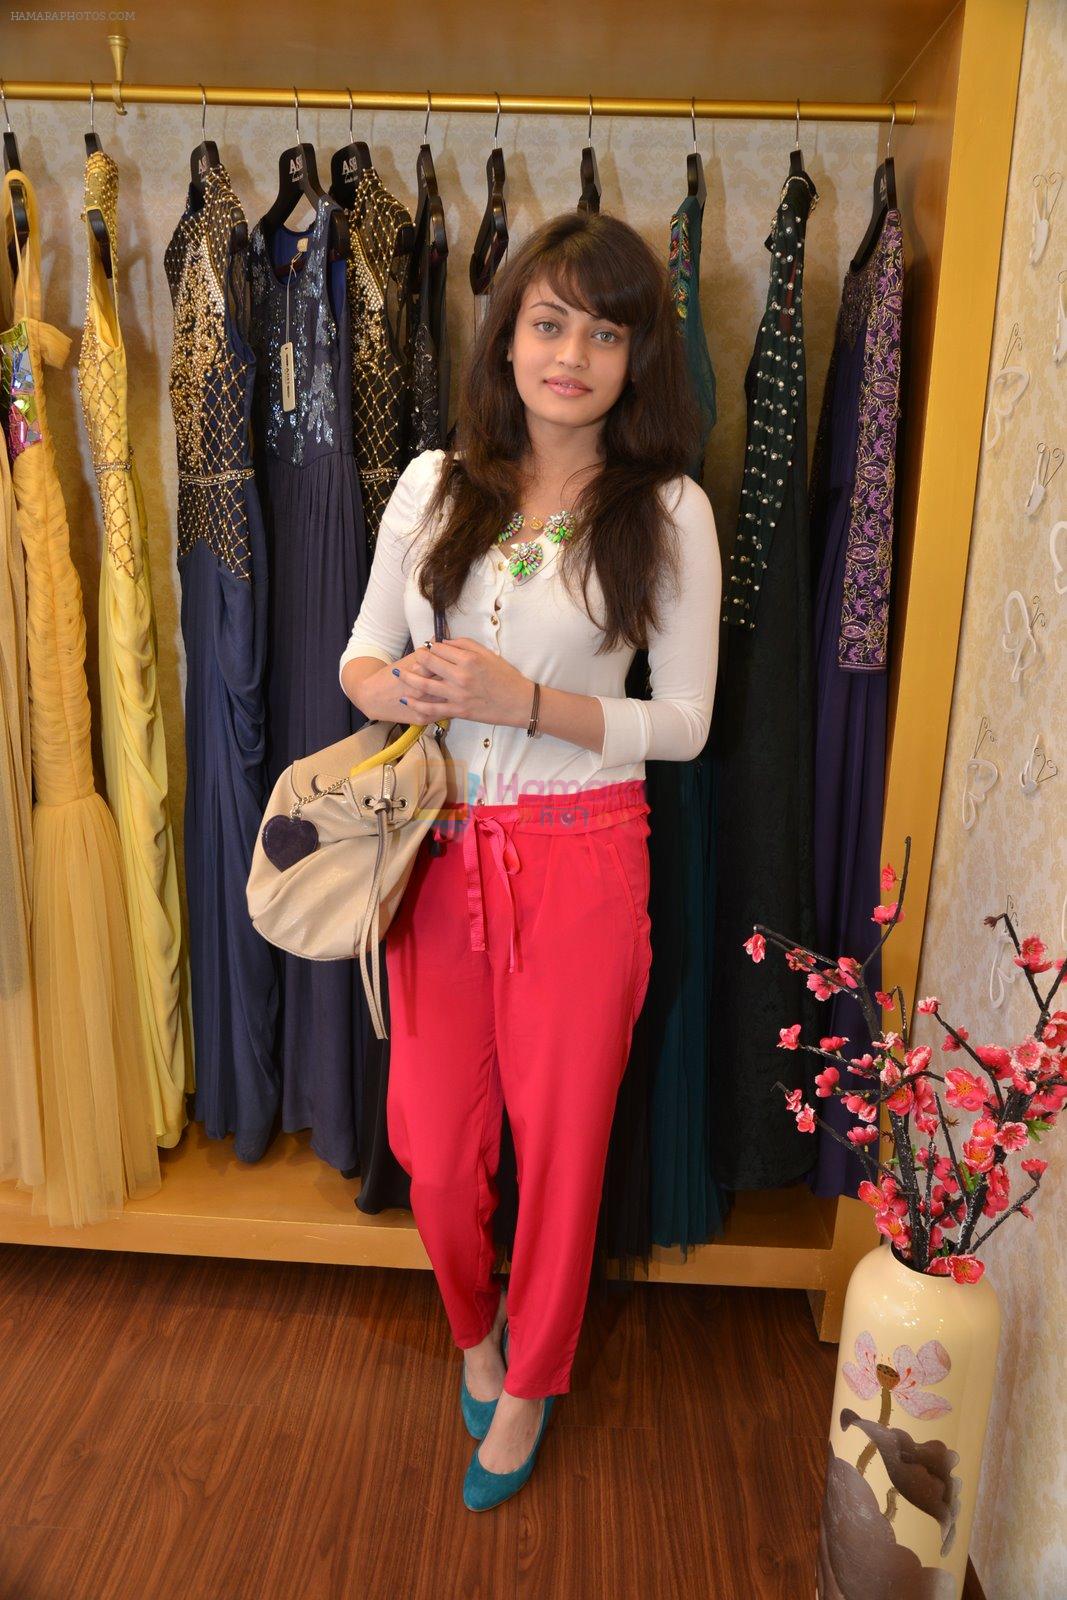 Sneha Ullal at Asha Karla's summer 2015 couture collection hosted by Arpita Khan in Juhu, Mumbai on 5th Feb 2015